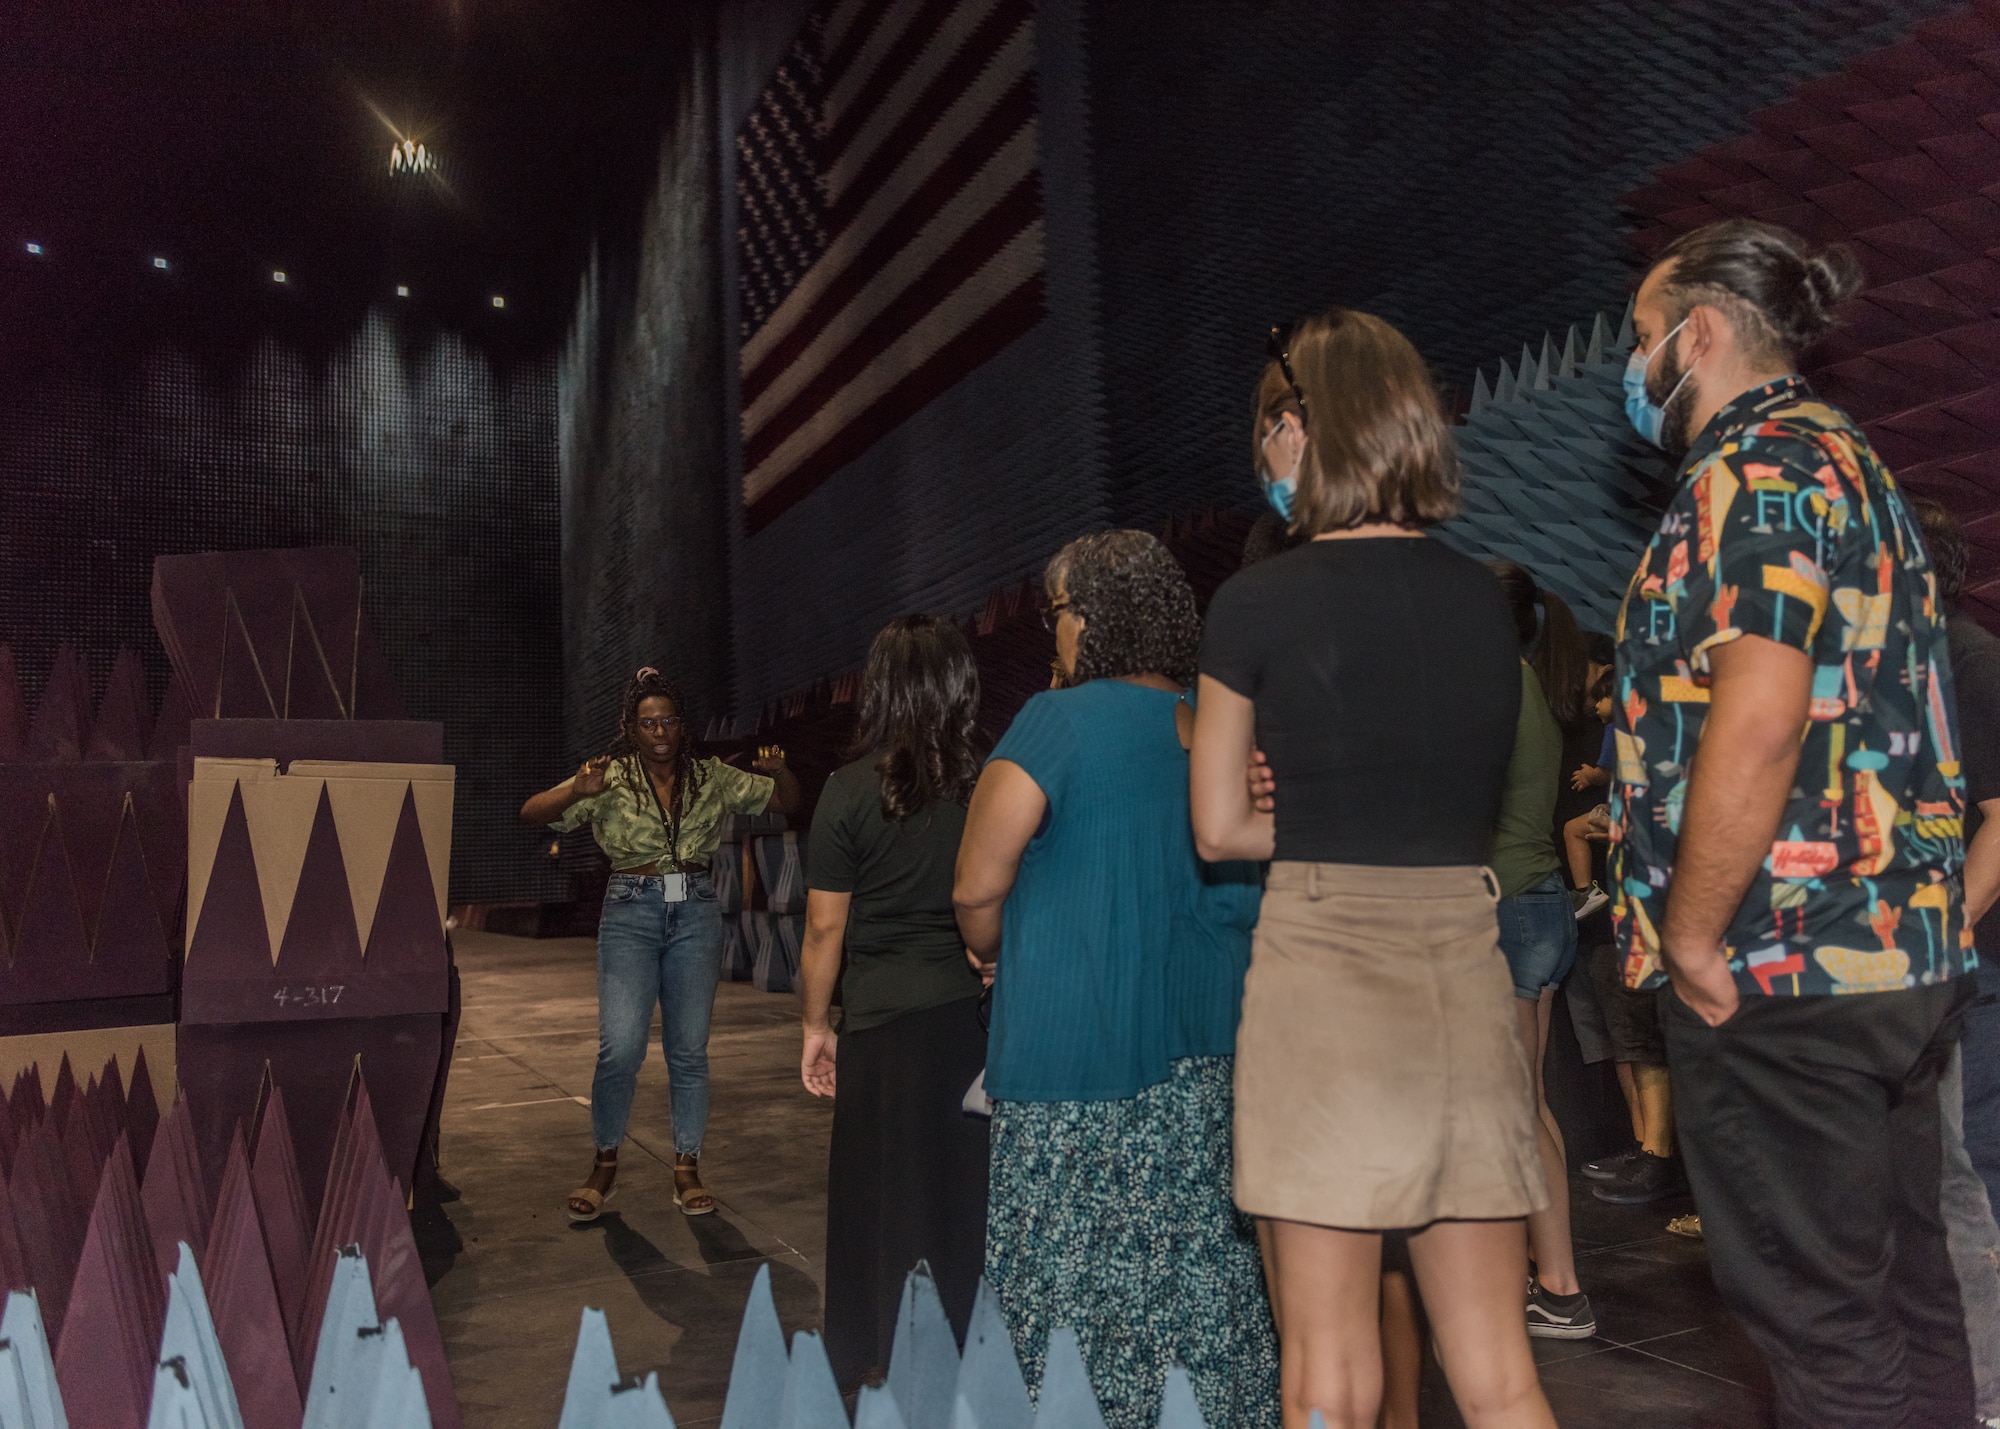 Amarachi Egbuziem-Ciolkosz, an engineer with the 772nd Test Squadron, 412th Electronic Warfare Group, provides a tour of the Benefield Anechoic Facility during the 412th EWG Family Day at Edwards Air Force Base, California, June 18. (Air Force photo by Bryce Bennett)